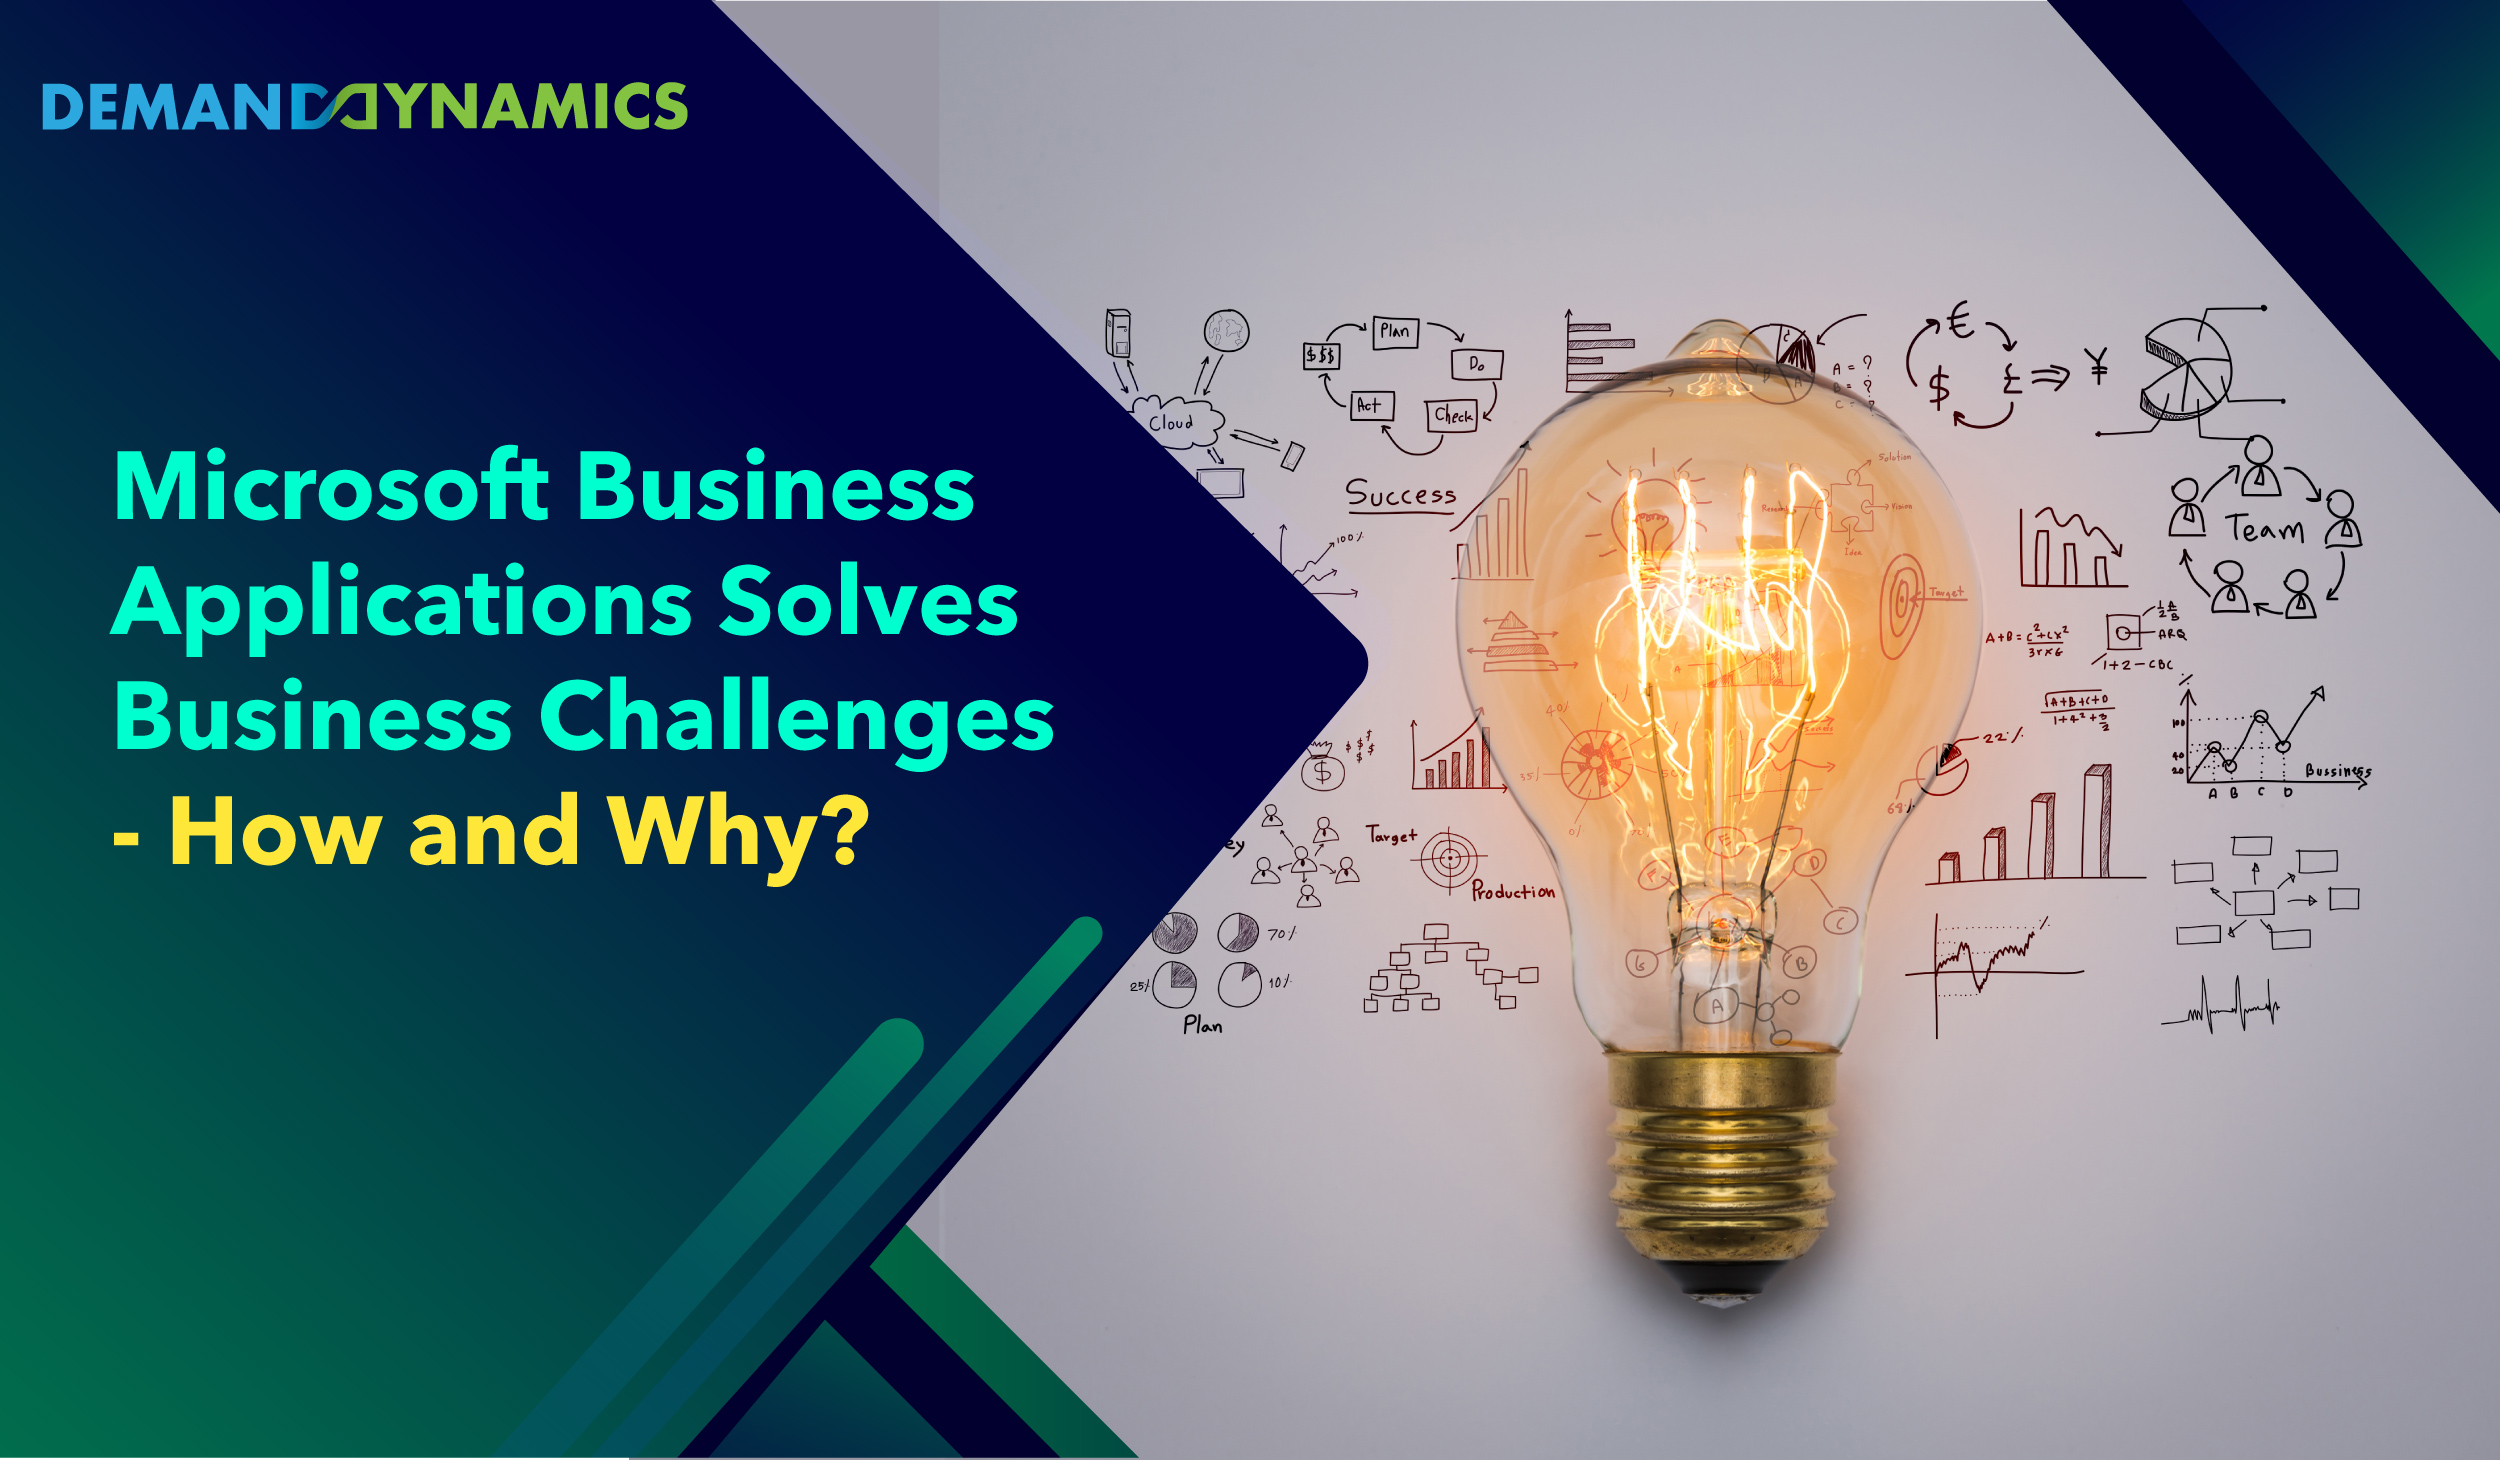 Solving Challenges through Microsoft Business Applications